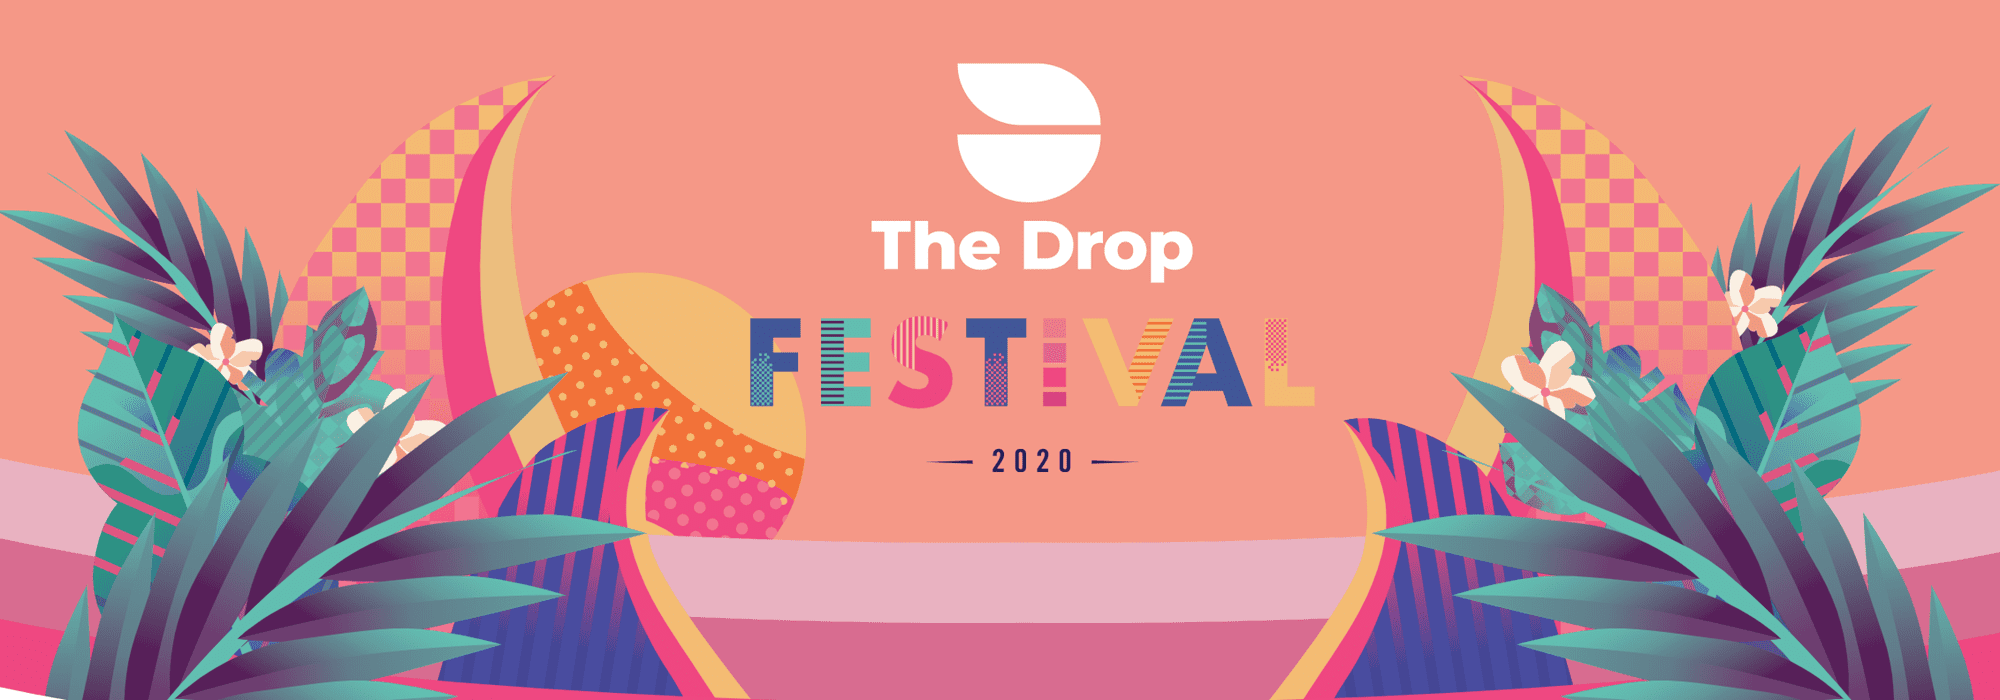 The Drop Festival 2020 - City of Newcastle